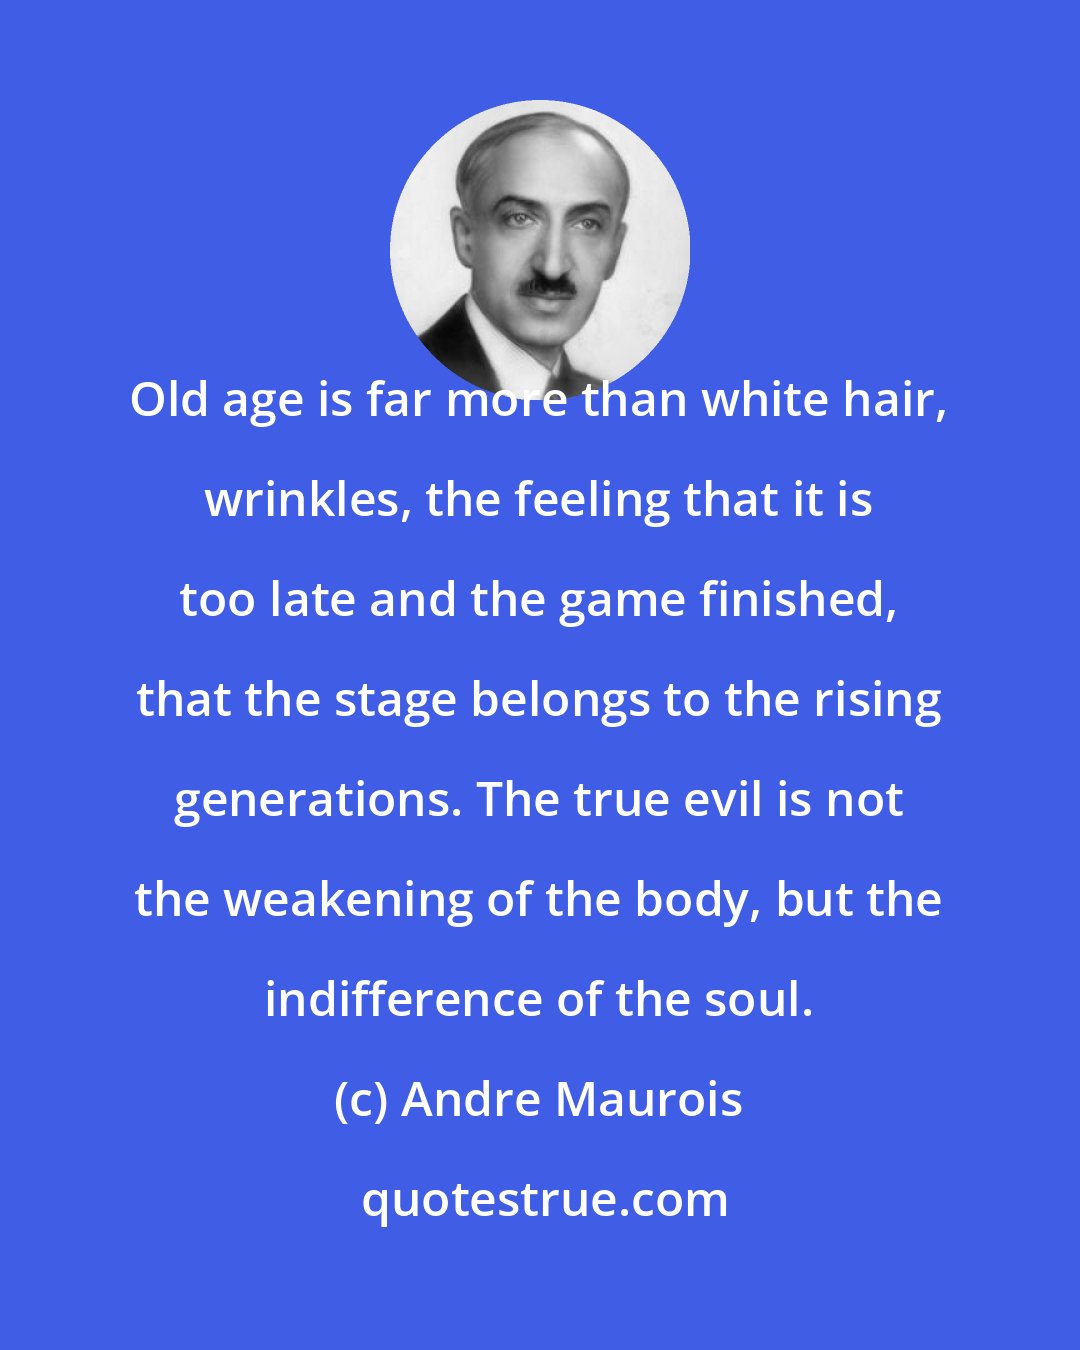 Andre Maurois: Old age is far more than white hair, wrinkles, the feeling that it is too late and the game finished, that the stage belongs to the rising generations. The true evil is not the weakening of the body, but the indifference of the soul.